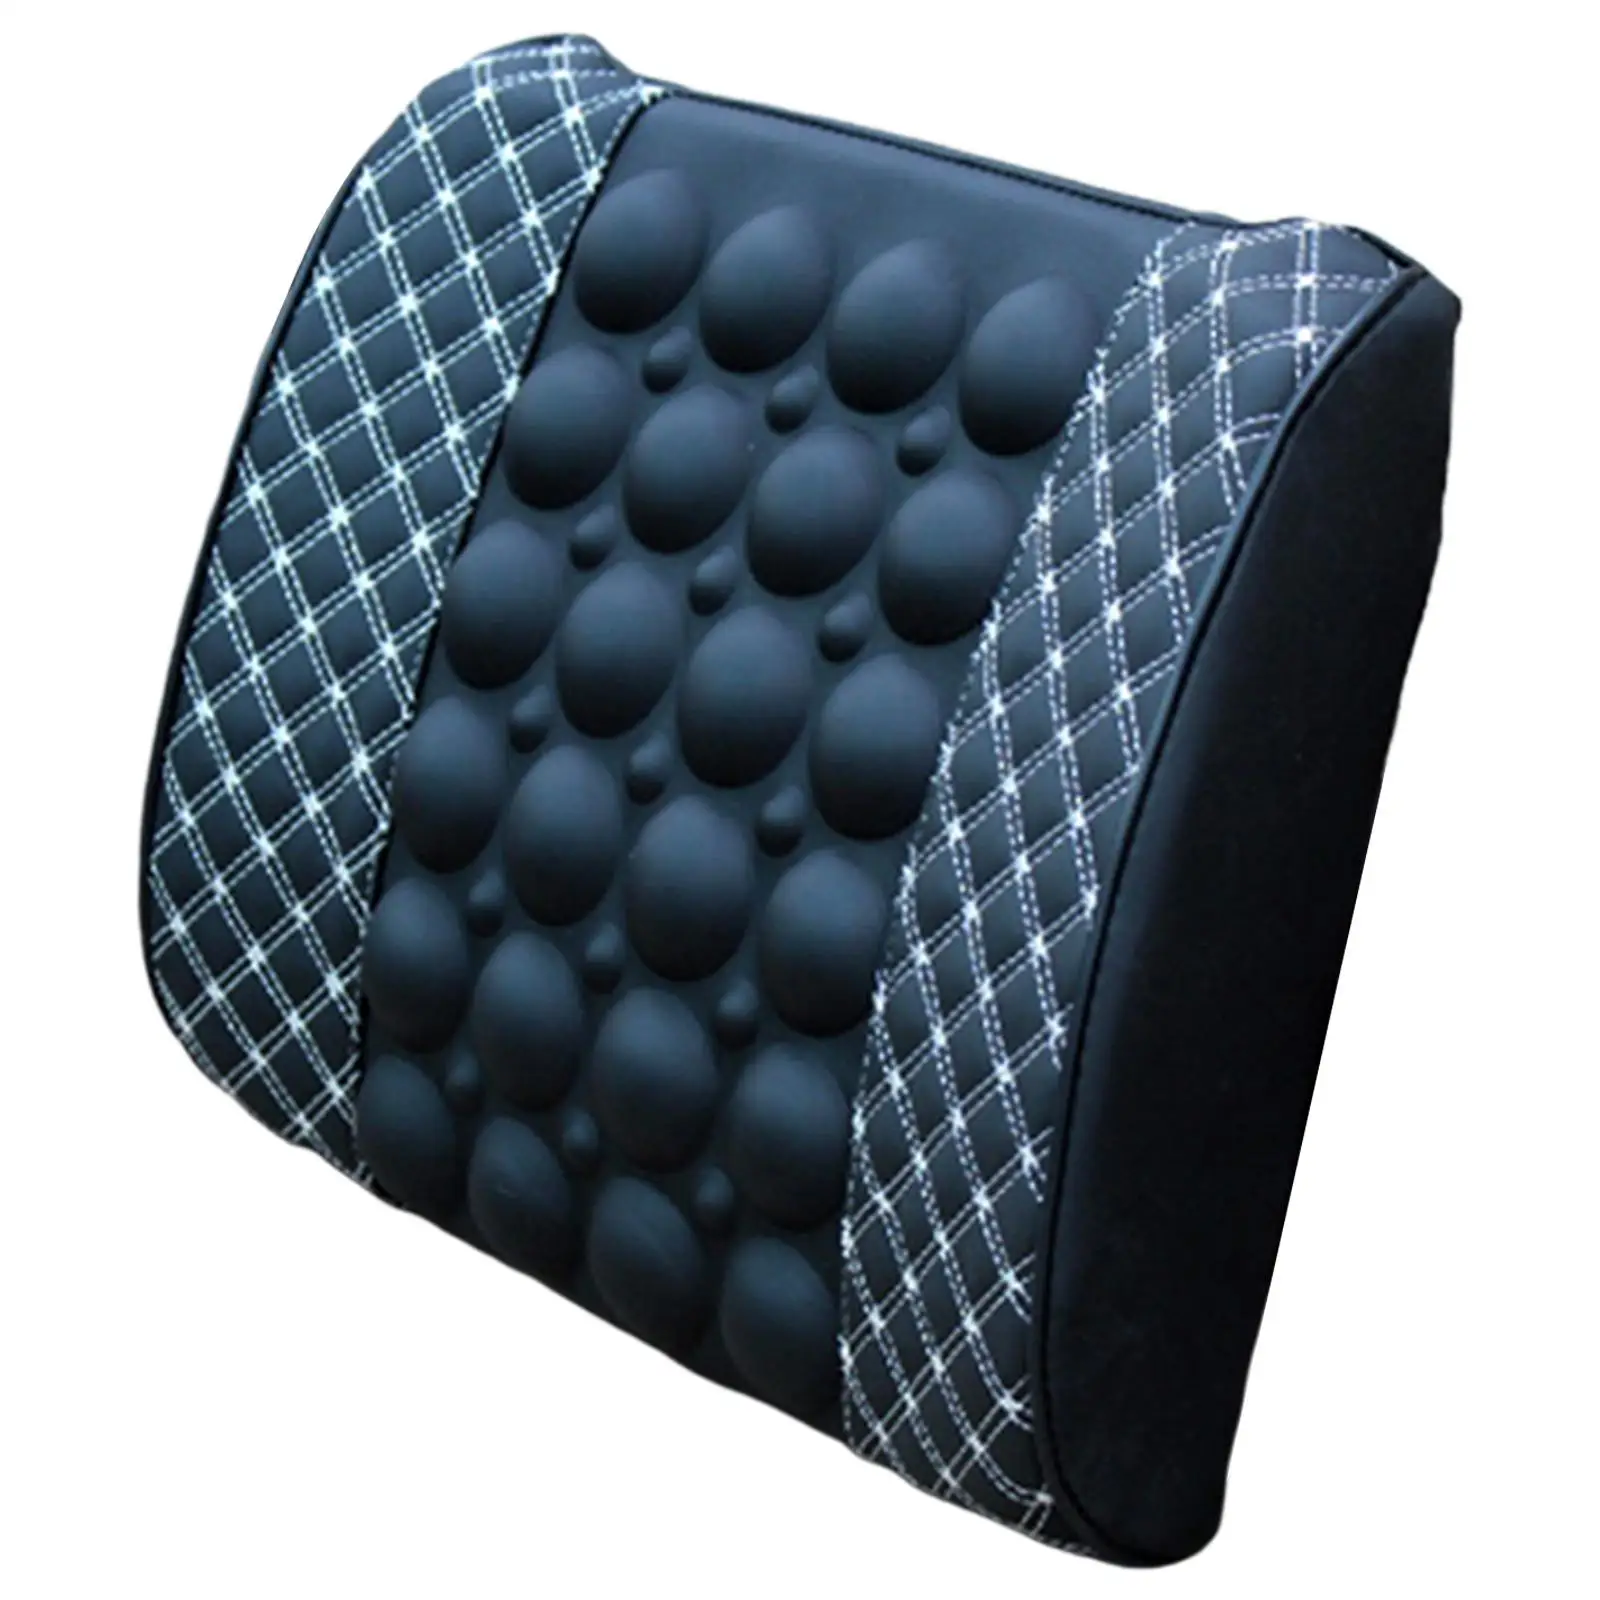 Car Support Pillow Seat Back for Relaxation